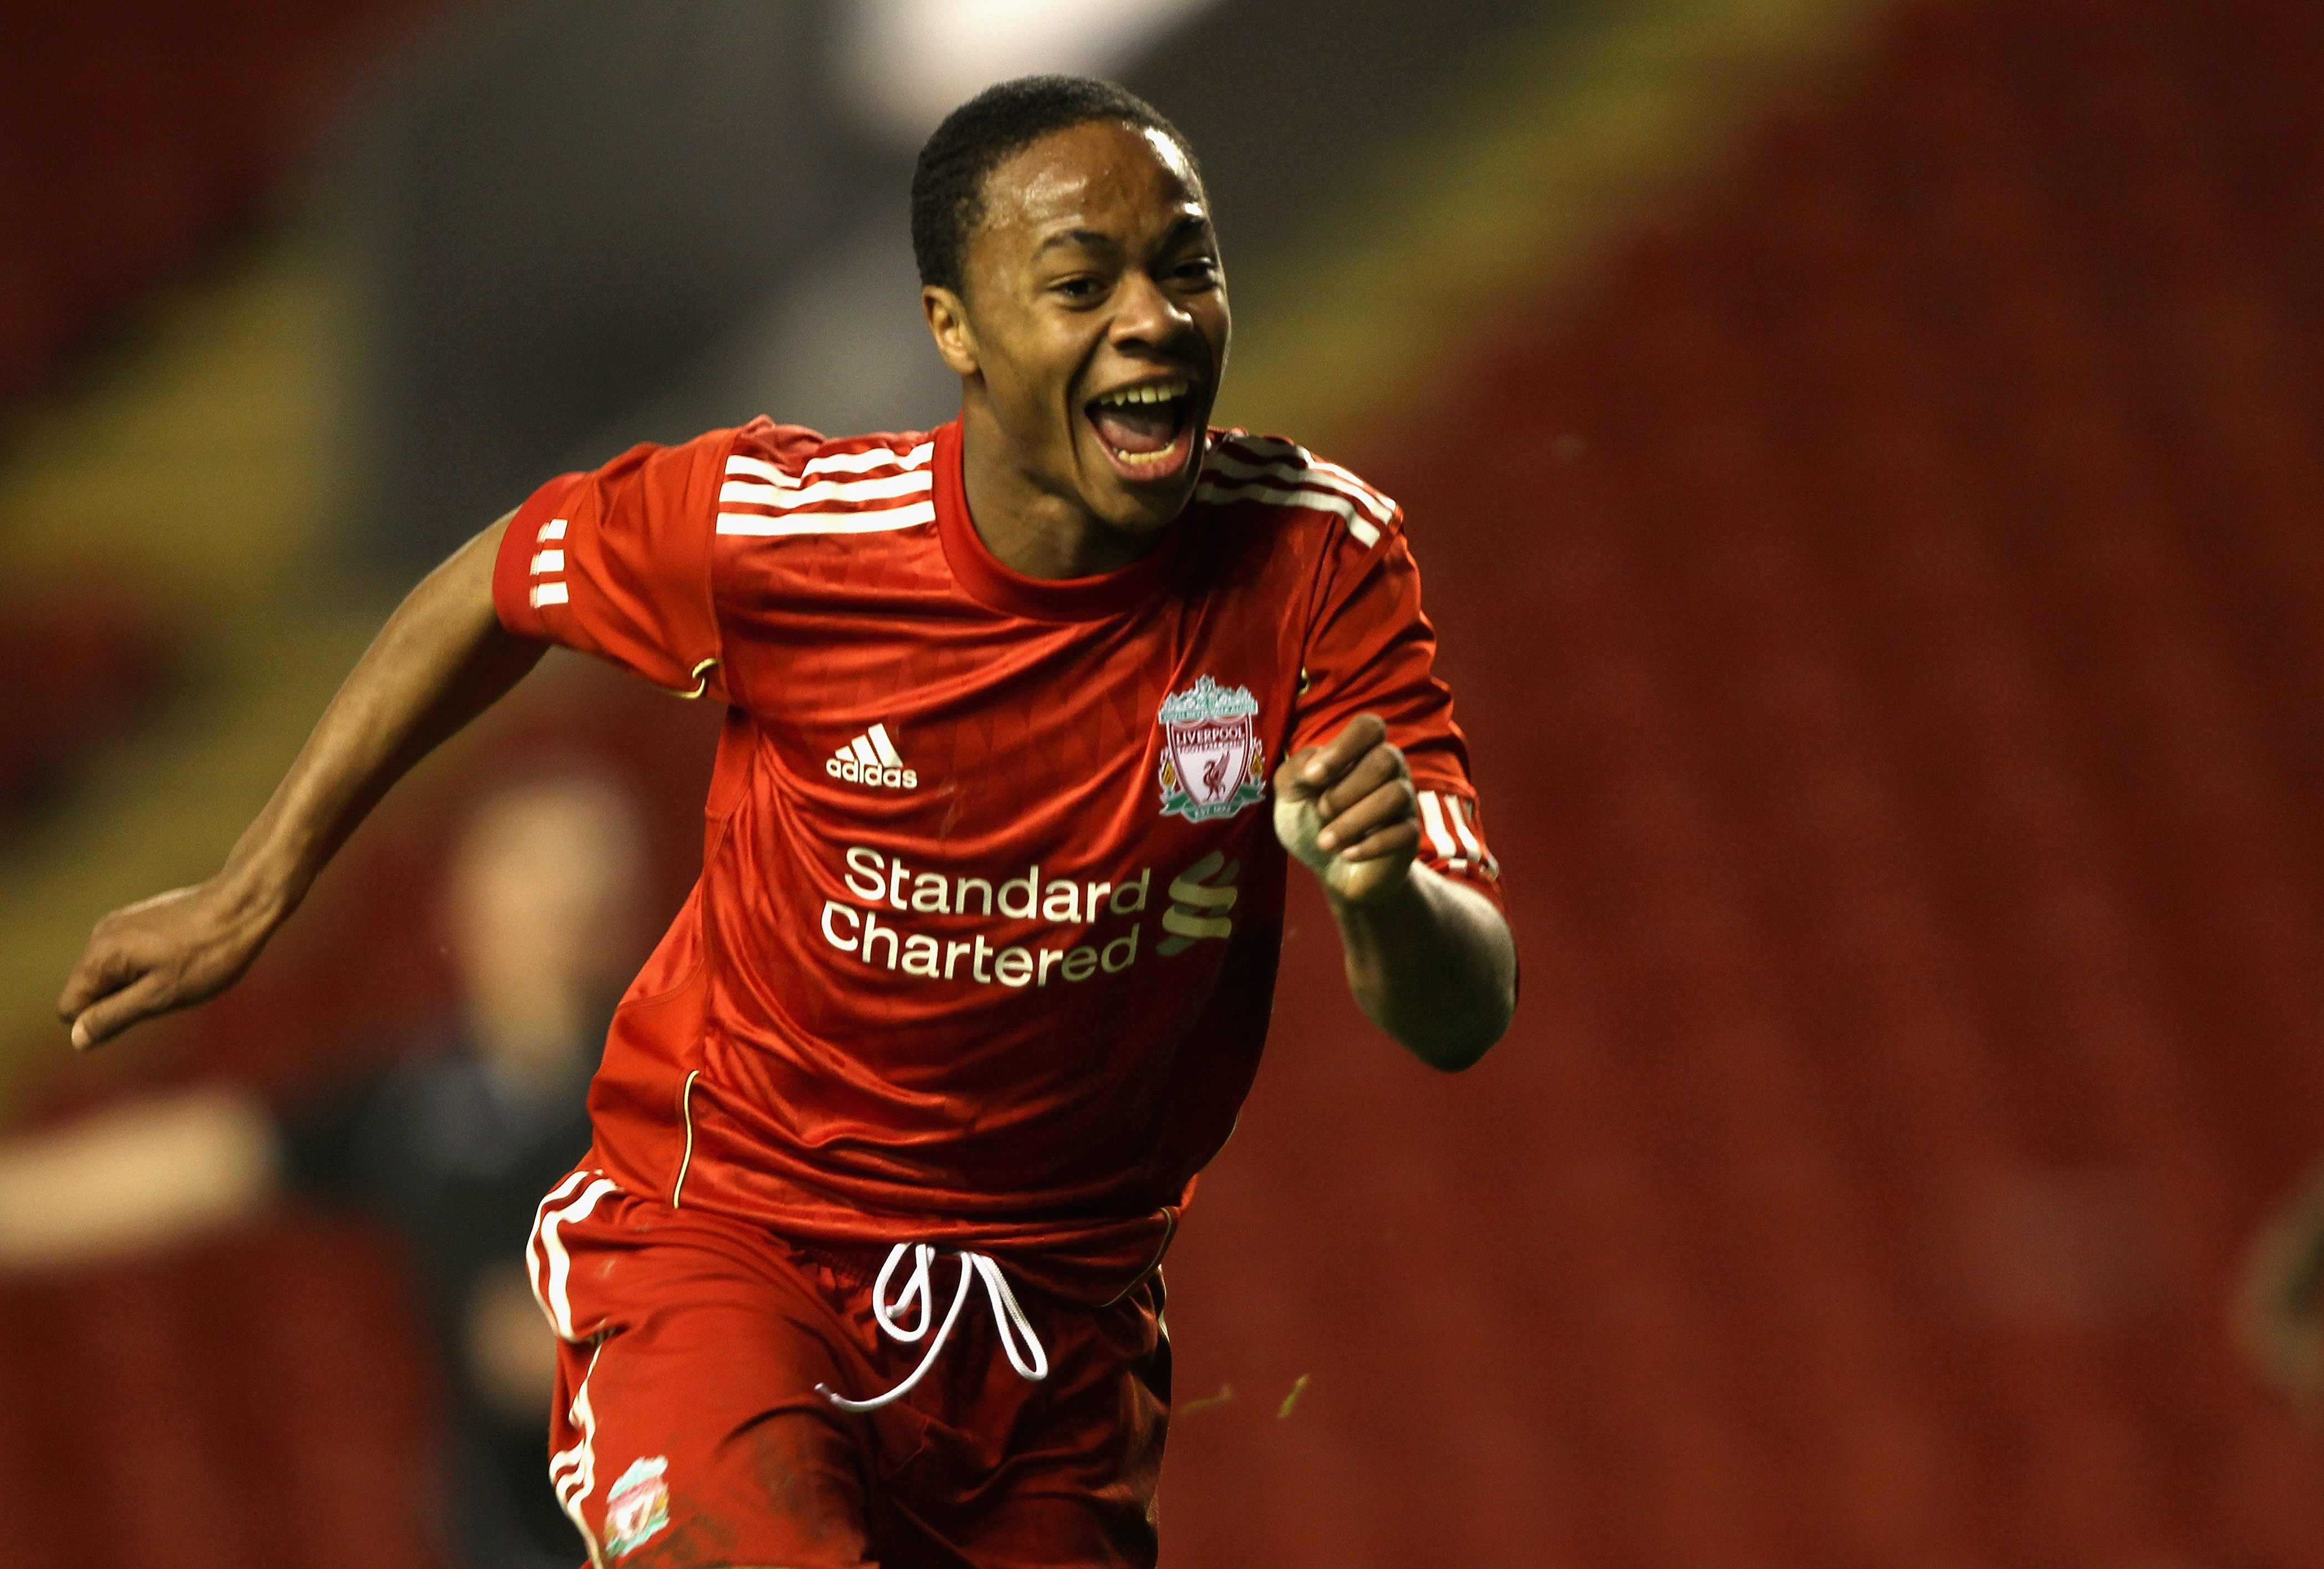 LIVERPOOL, ENGLAND - FEBRUARY 14:  Raheem Sterling of Liverpool celebrates after scoring his first goal during the FA Youth Cup match between Liverpool and Southend United at Anfield on February 14, 2011 in Liverpool, England.  (Photo by Clive Brunskill/G